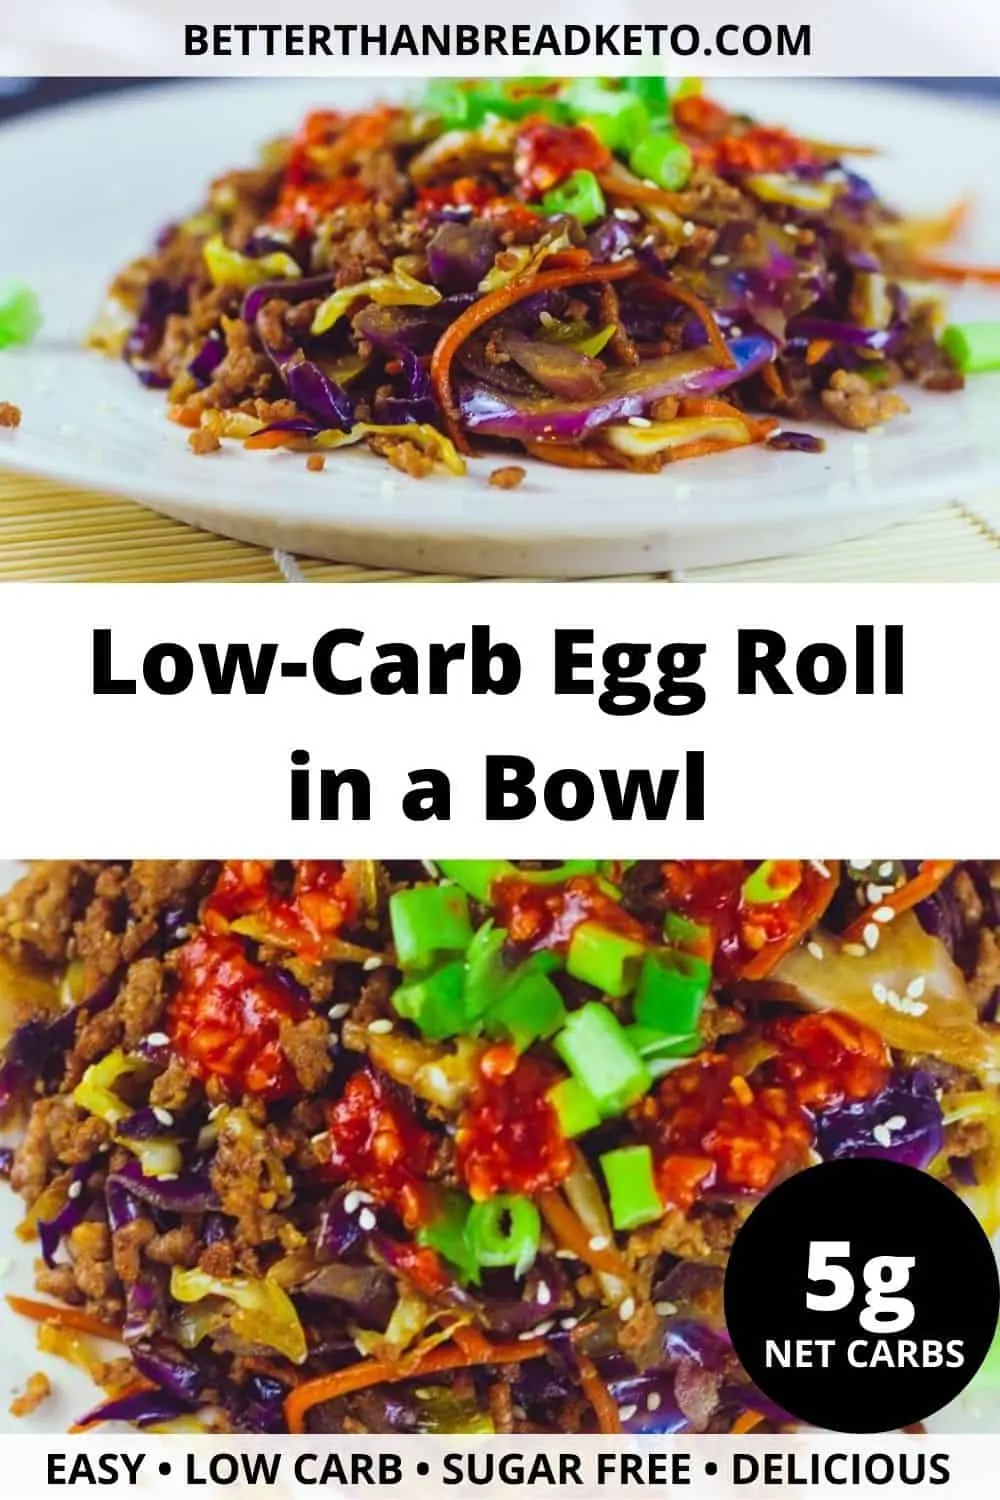 Low-Carb Egg Roll in a Bowl